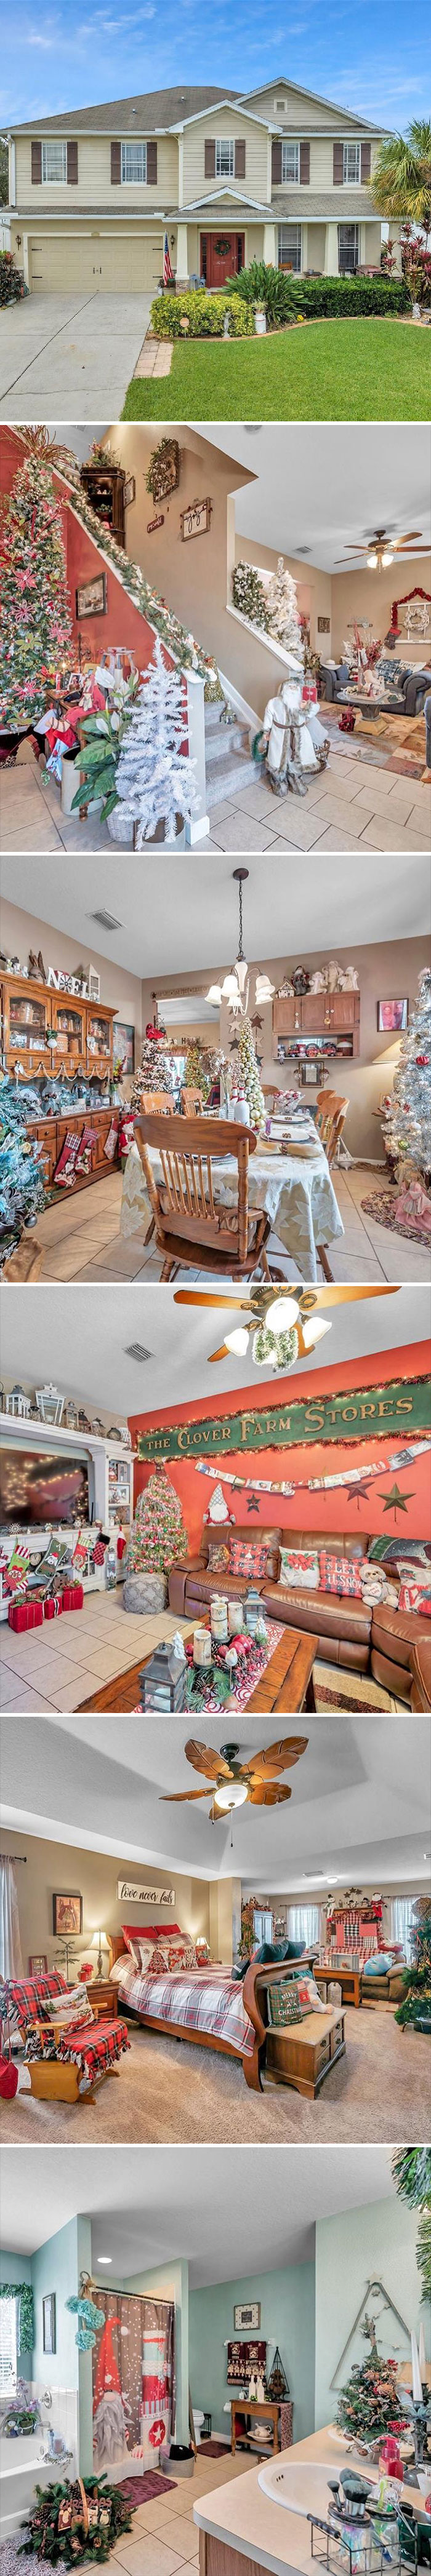 The Perfect Christmas Home Does Exist And It’s This One In Plant City, Fl. Currently Listed For $479,000